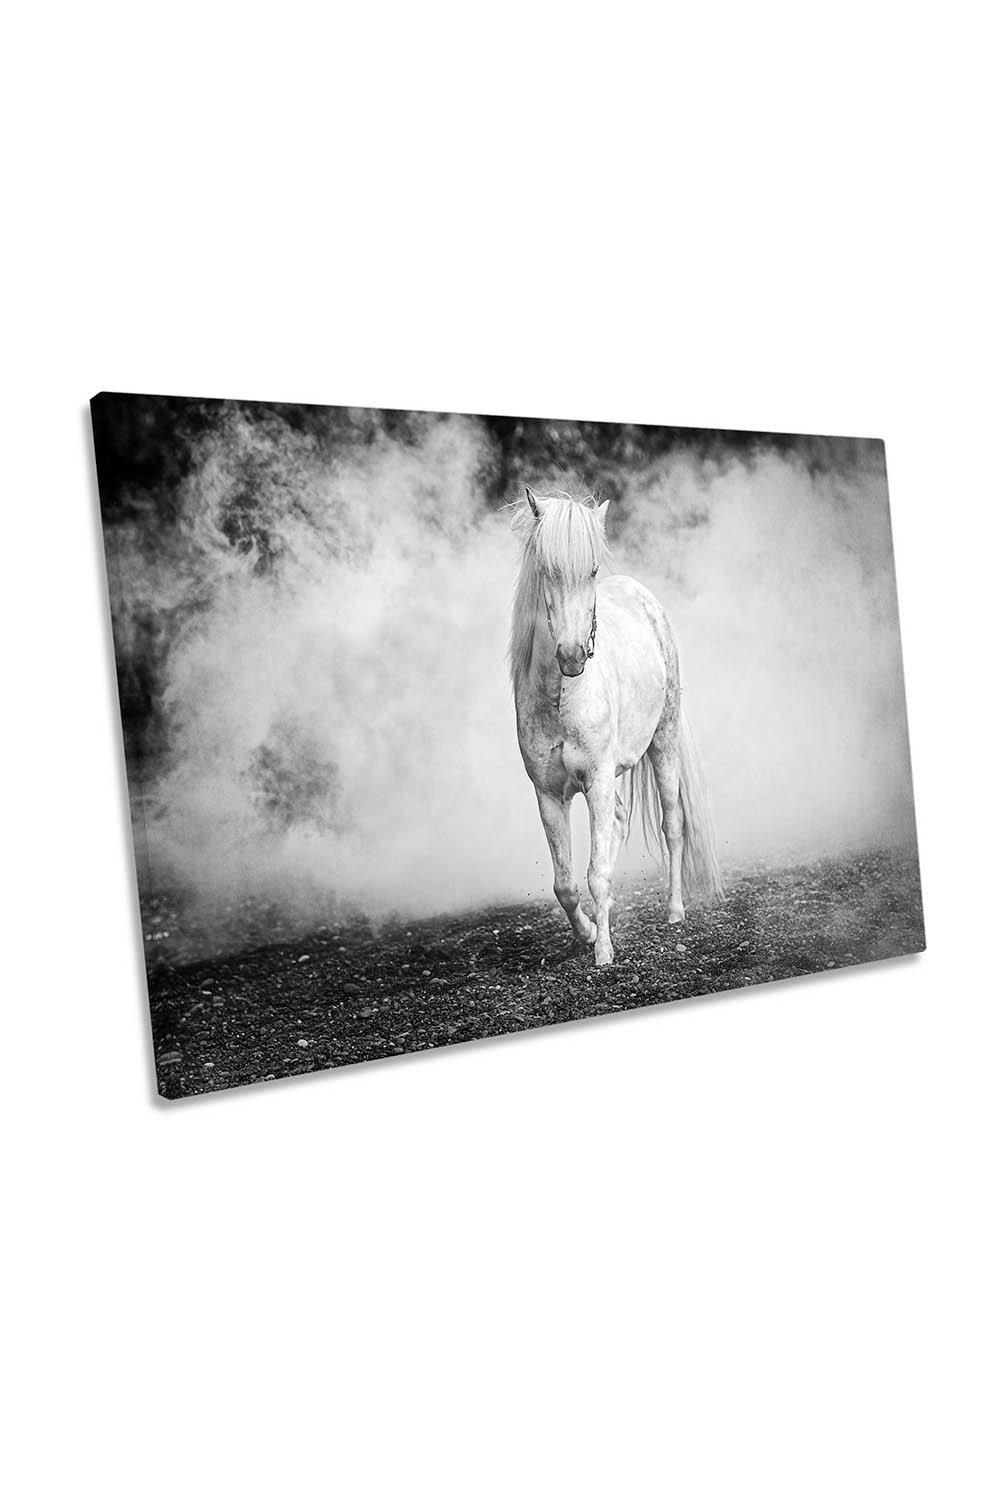 Icelandic Pony Horse Black and White Canvas Wall Art Picture Print